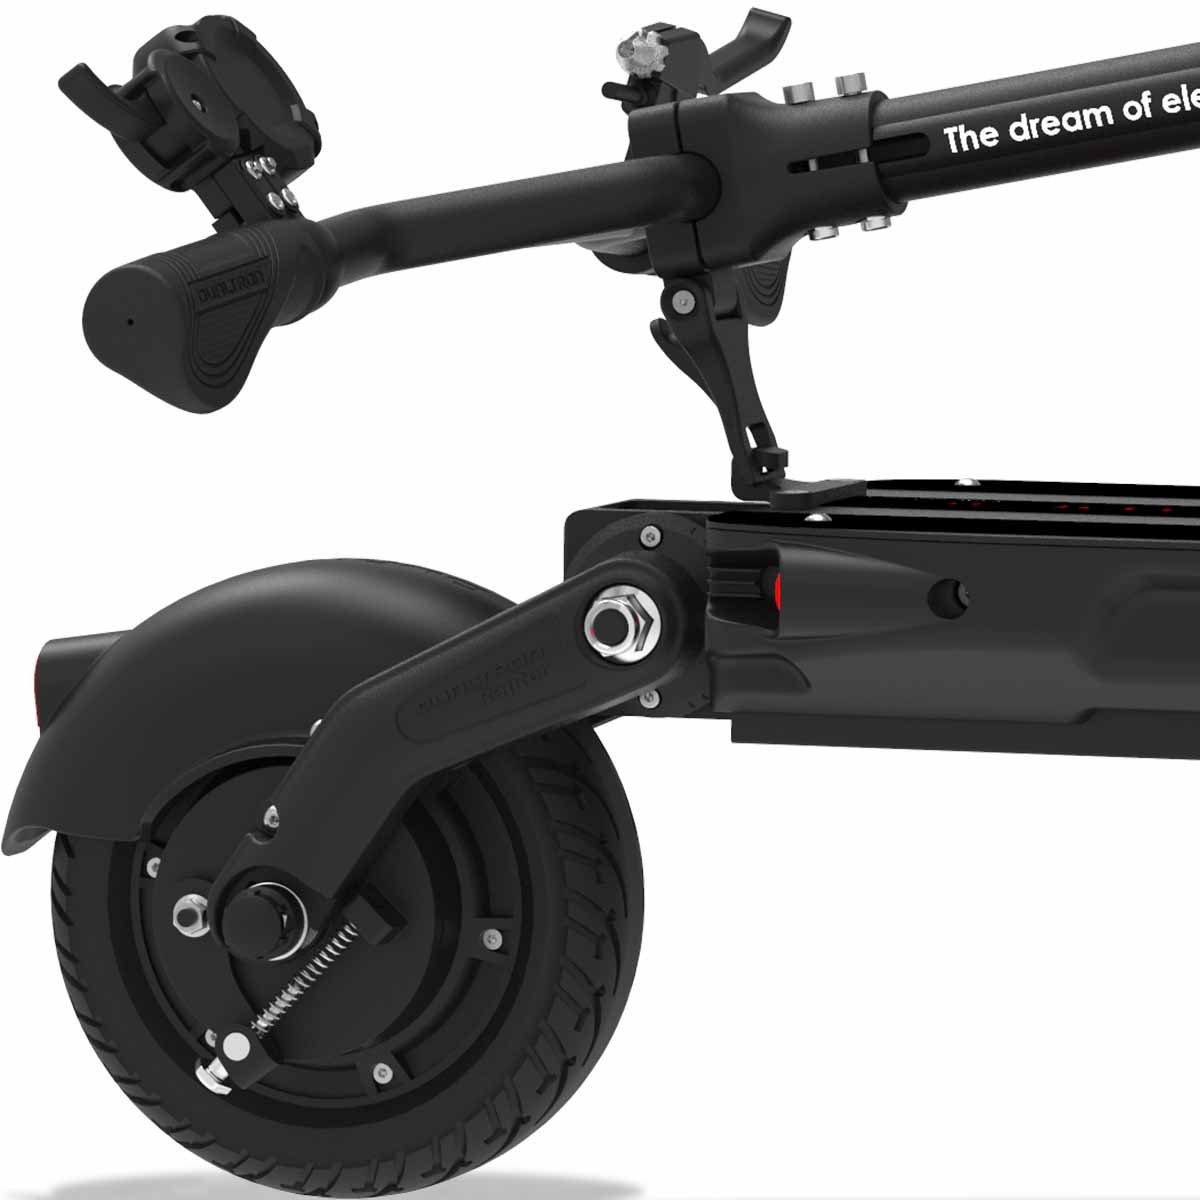 Dualtron Raptor 2 60V 14Ah CN The Raptor 2 is a high-performance scooter that truly deserves the Dualtron name while offering a relatively maintenance-free and lightweight package. Never worry about flat tires or bent rotors again with this solid tire and drum brake electric scooter. The Raptor 2 is a major upgrade to the original Raptor and now offers standard front lights, the ey3 throttle and ABS brakes. The Raptor 2 weighs just 50 pounds and has a 60-volt, 14Ah battery that gives you a range of up to 37 miles. Speed: 60km Range: 60km